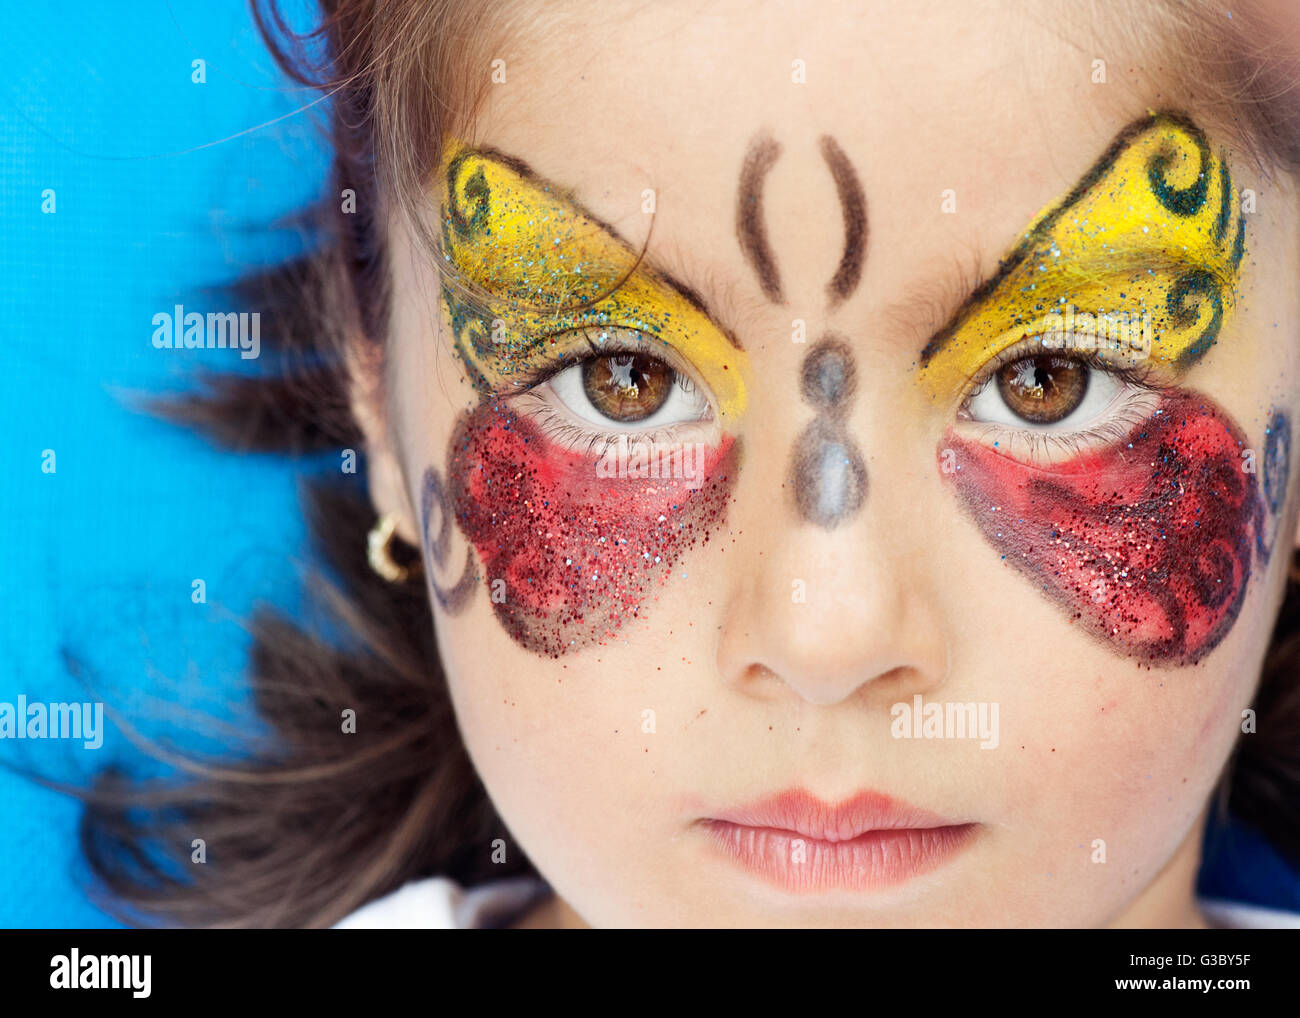 beautiful girl face painted with blue paint with glitter. Stock